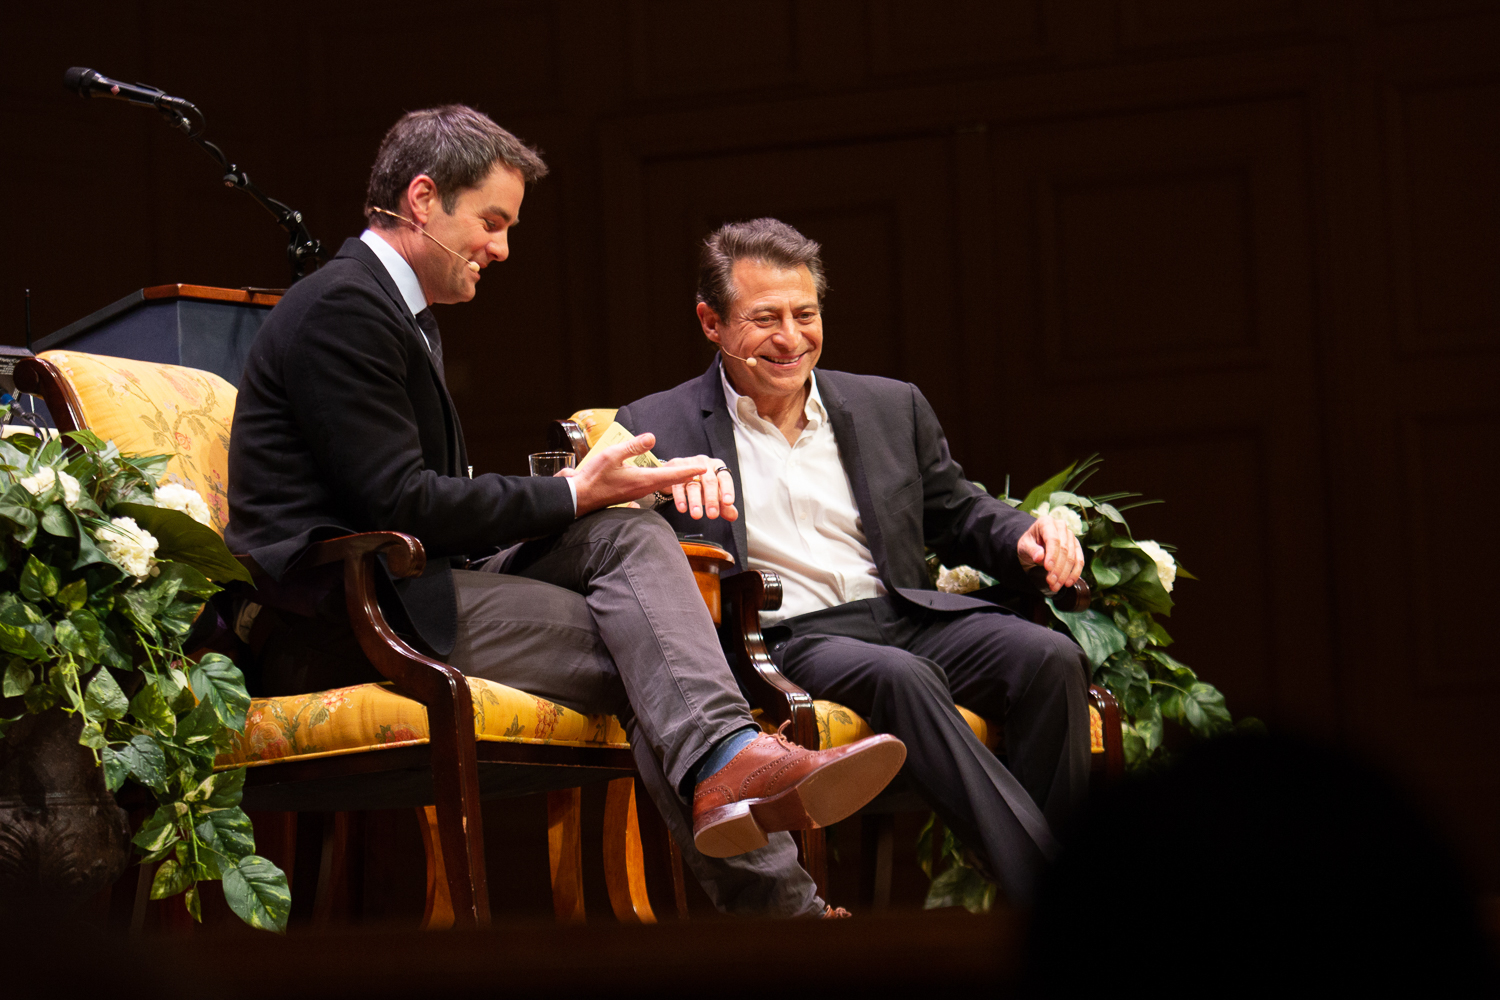 Peter Diamandis sits on stage with Jared Bowen